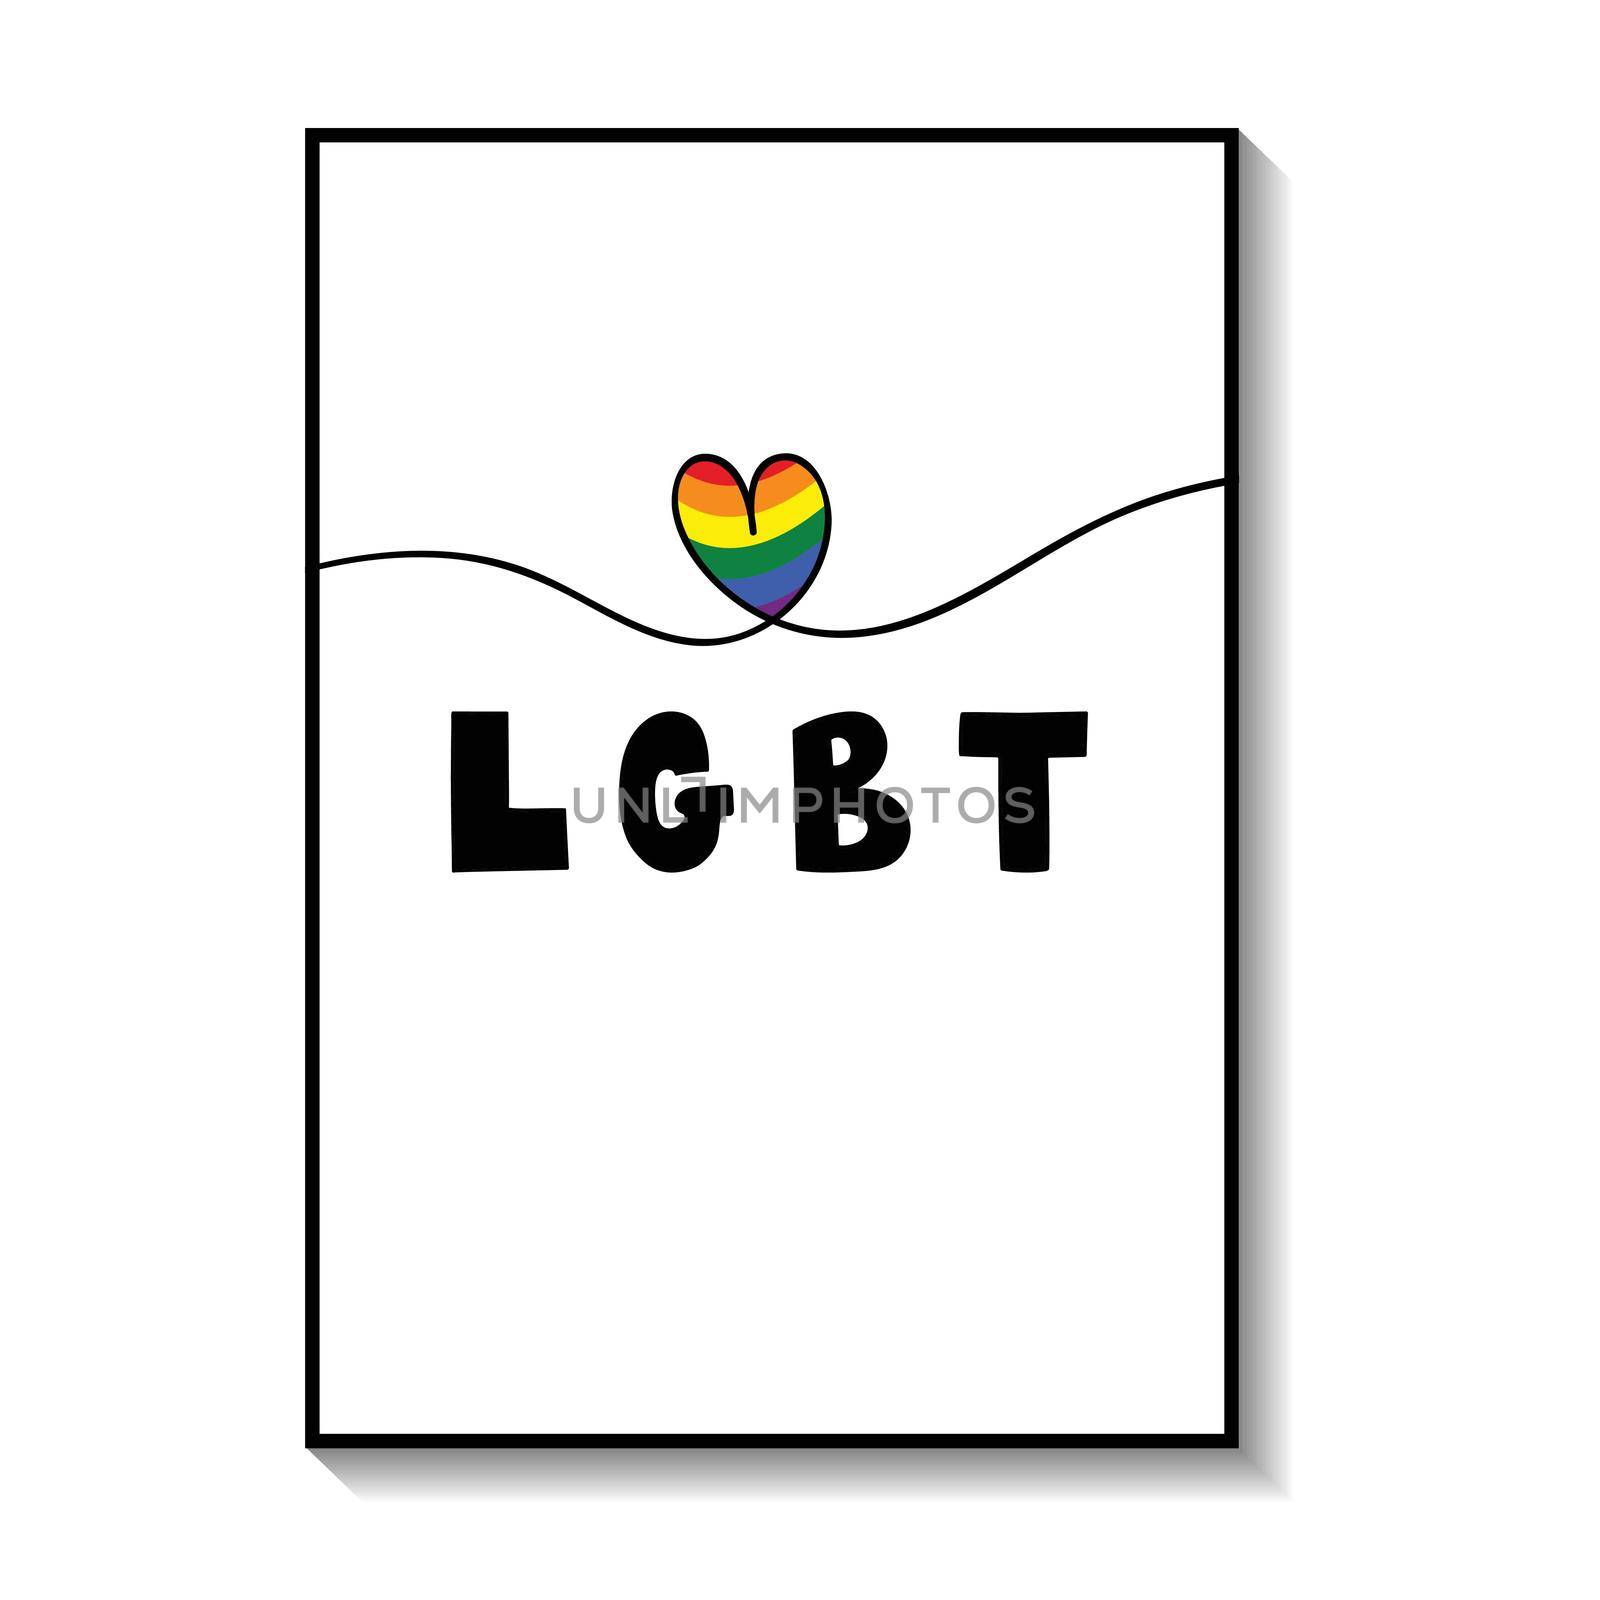 Gay pride month poster collection, banner. Lettering LGBT, hearts, colorful symbols, LGBT icons. Template design, vector illustration. Love wins. Geometric shapes in the colors on the rainbow by allaku